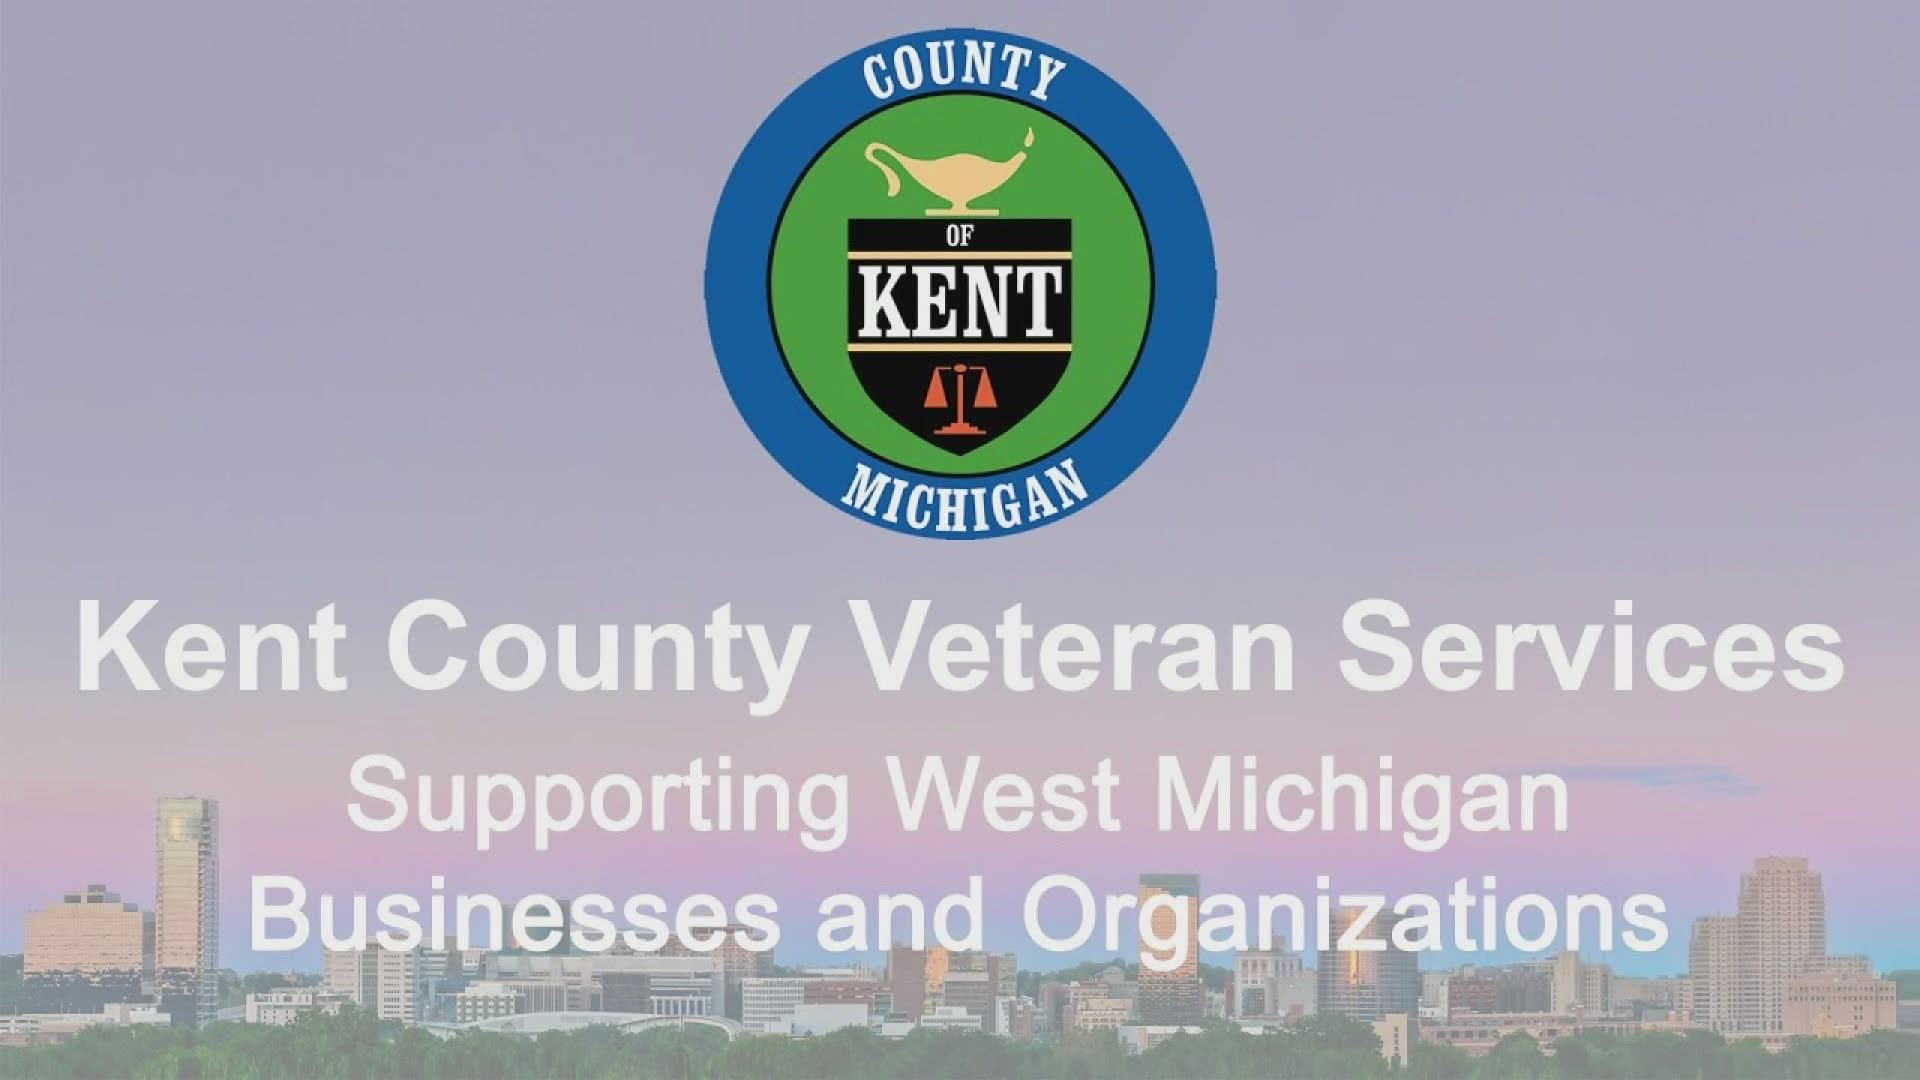 Kent County Veterans Services will assist veterans in filing claims and granting emergency relief funds.